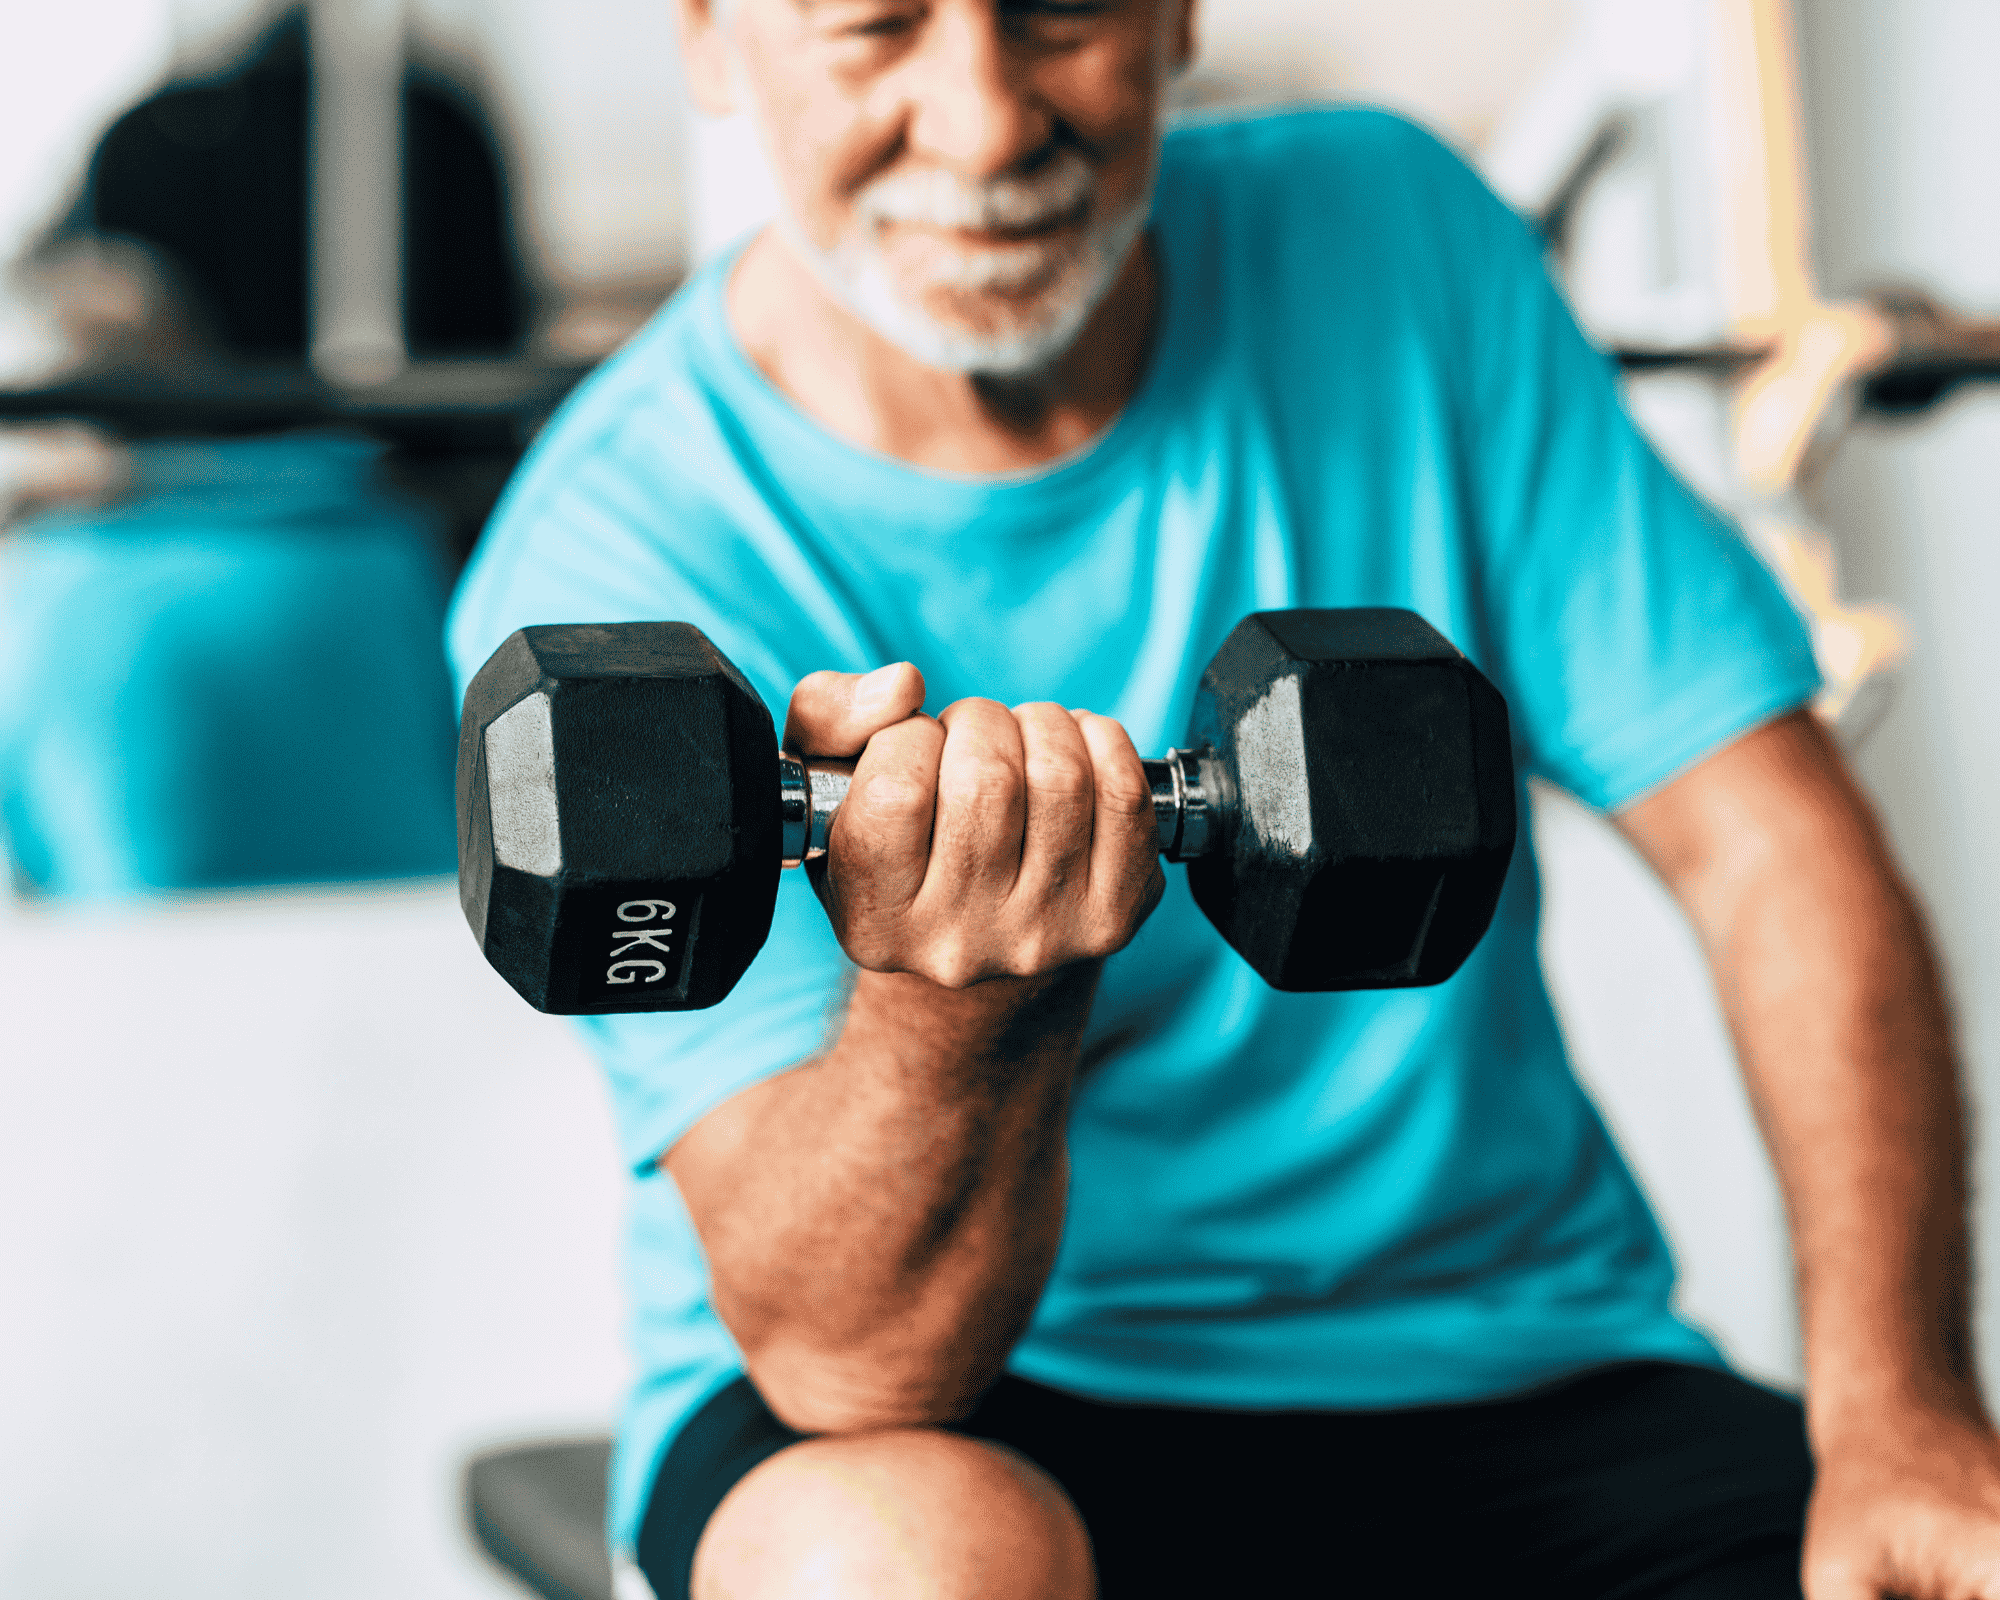 Senior Workouts - Does Medicare Cover Gym Membership?